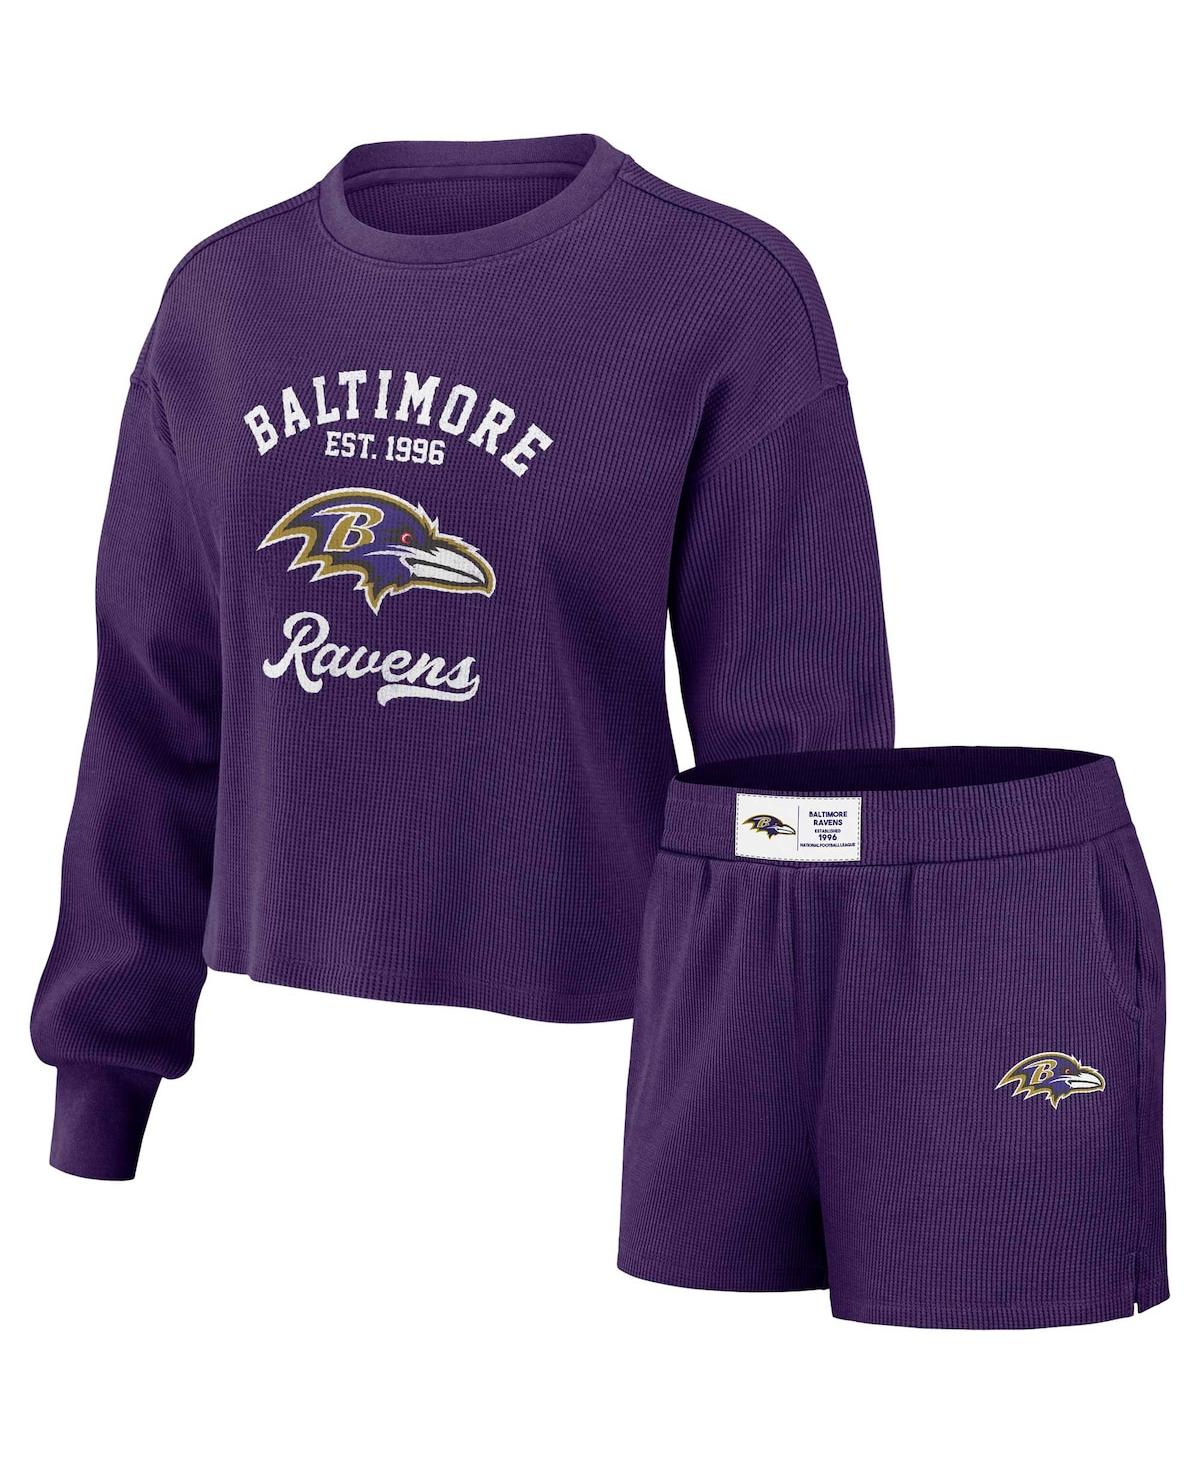 WEAR BY ERIN ANDREWS WOMEN'S WEAR BY ERIN ANDREWS PURPLE DISTRESSED BALTIMORE RAVENS WAFFLE KNIT LONG SLEEVE T-SHIRT AND 